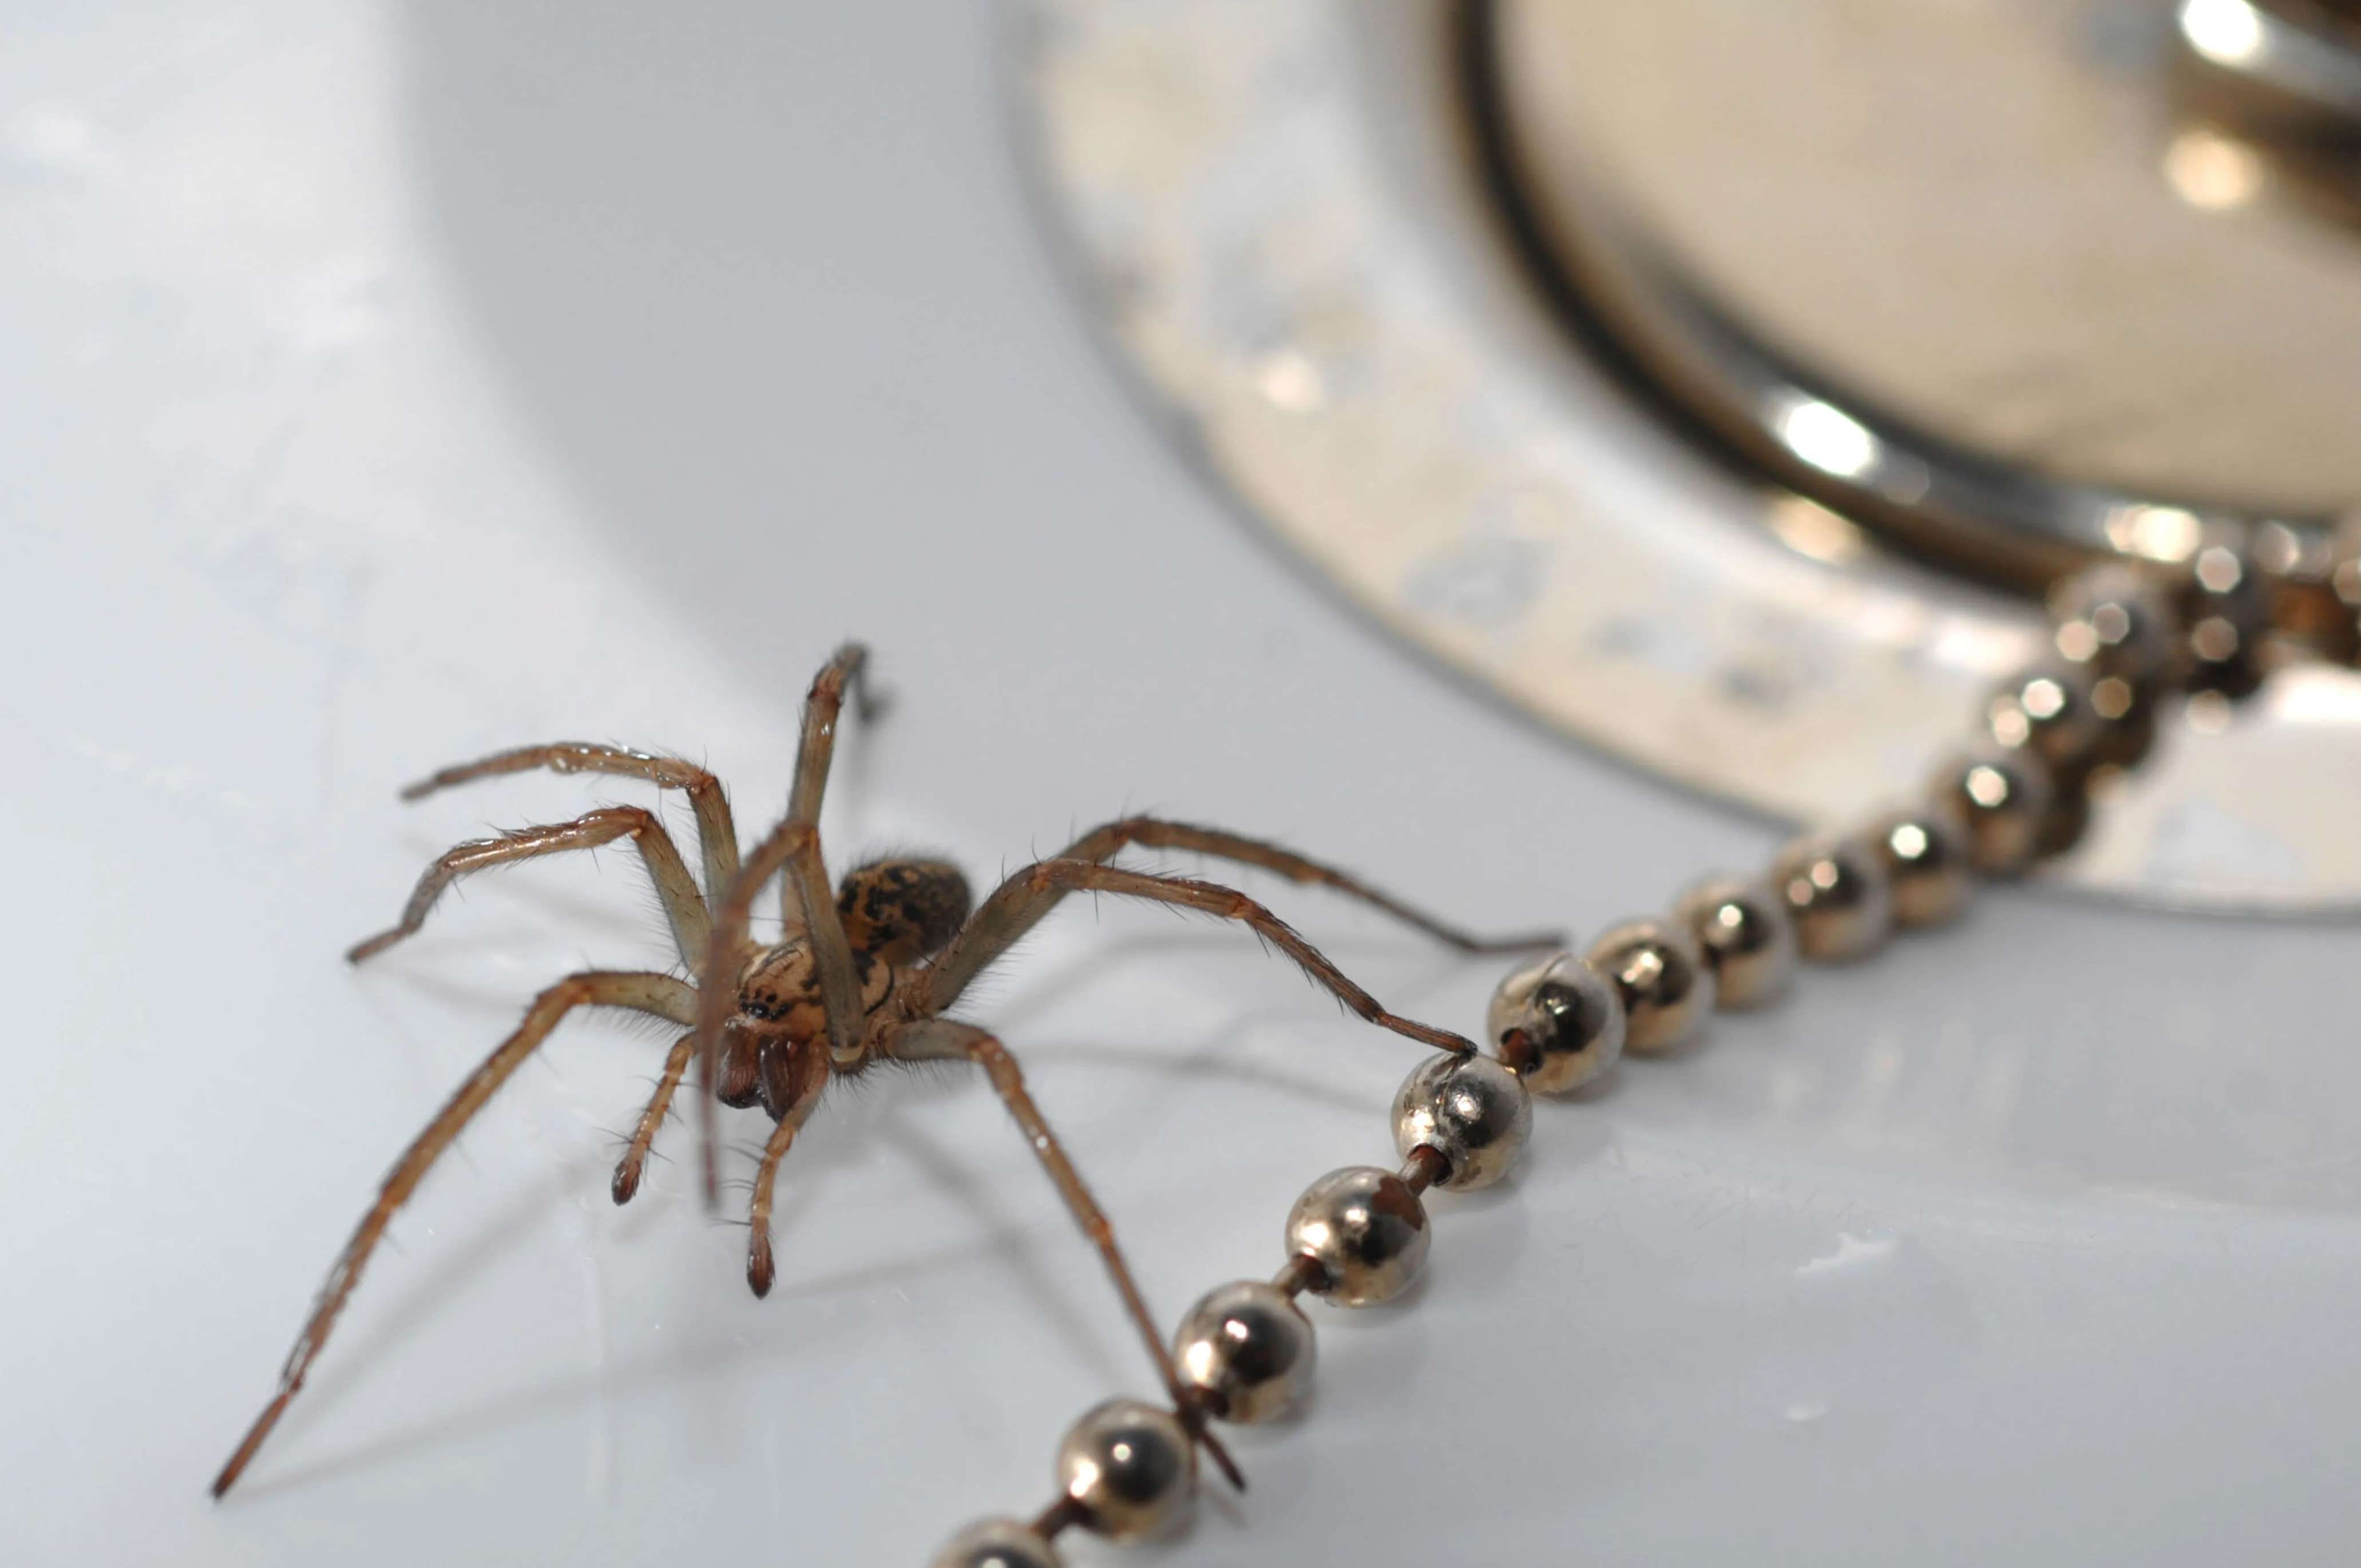 Say Goodbye To Spiders In Your Home - Effective And Pet-Friendly Solutions!